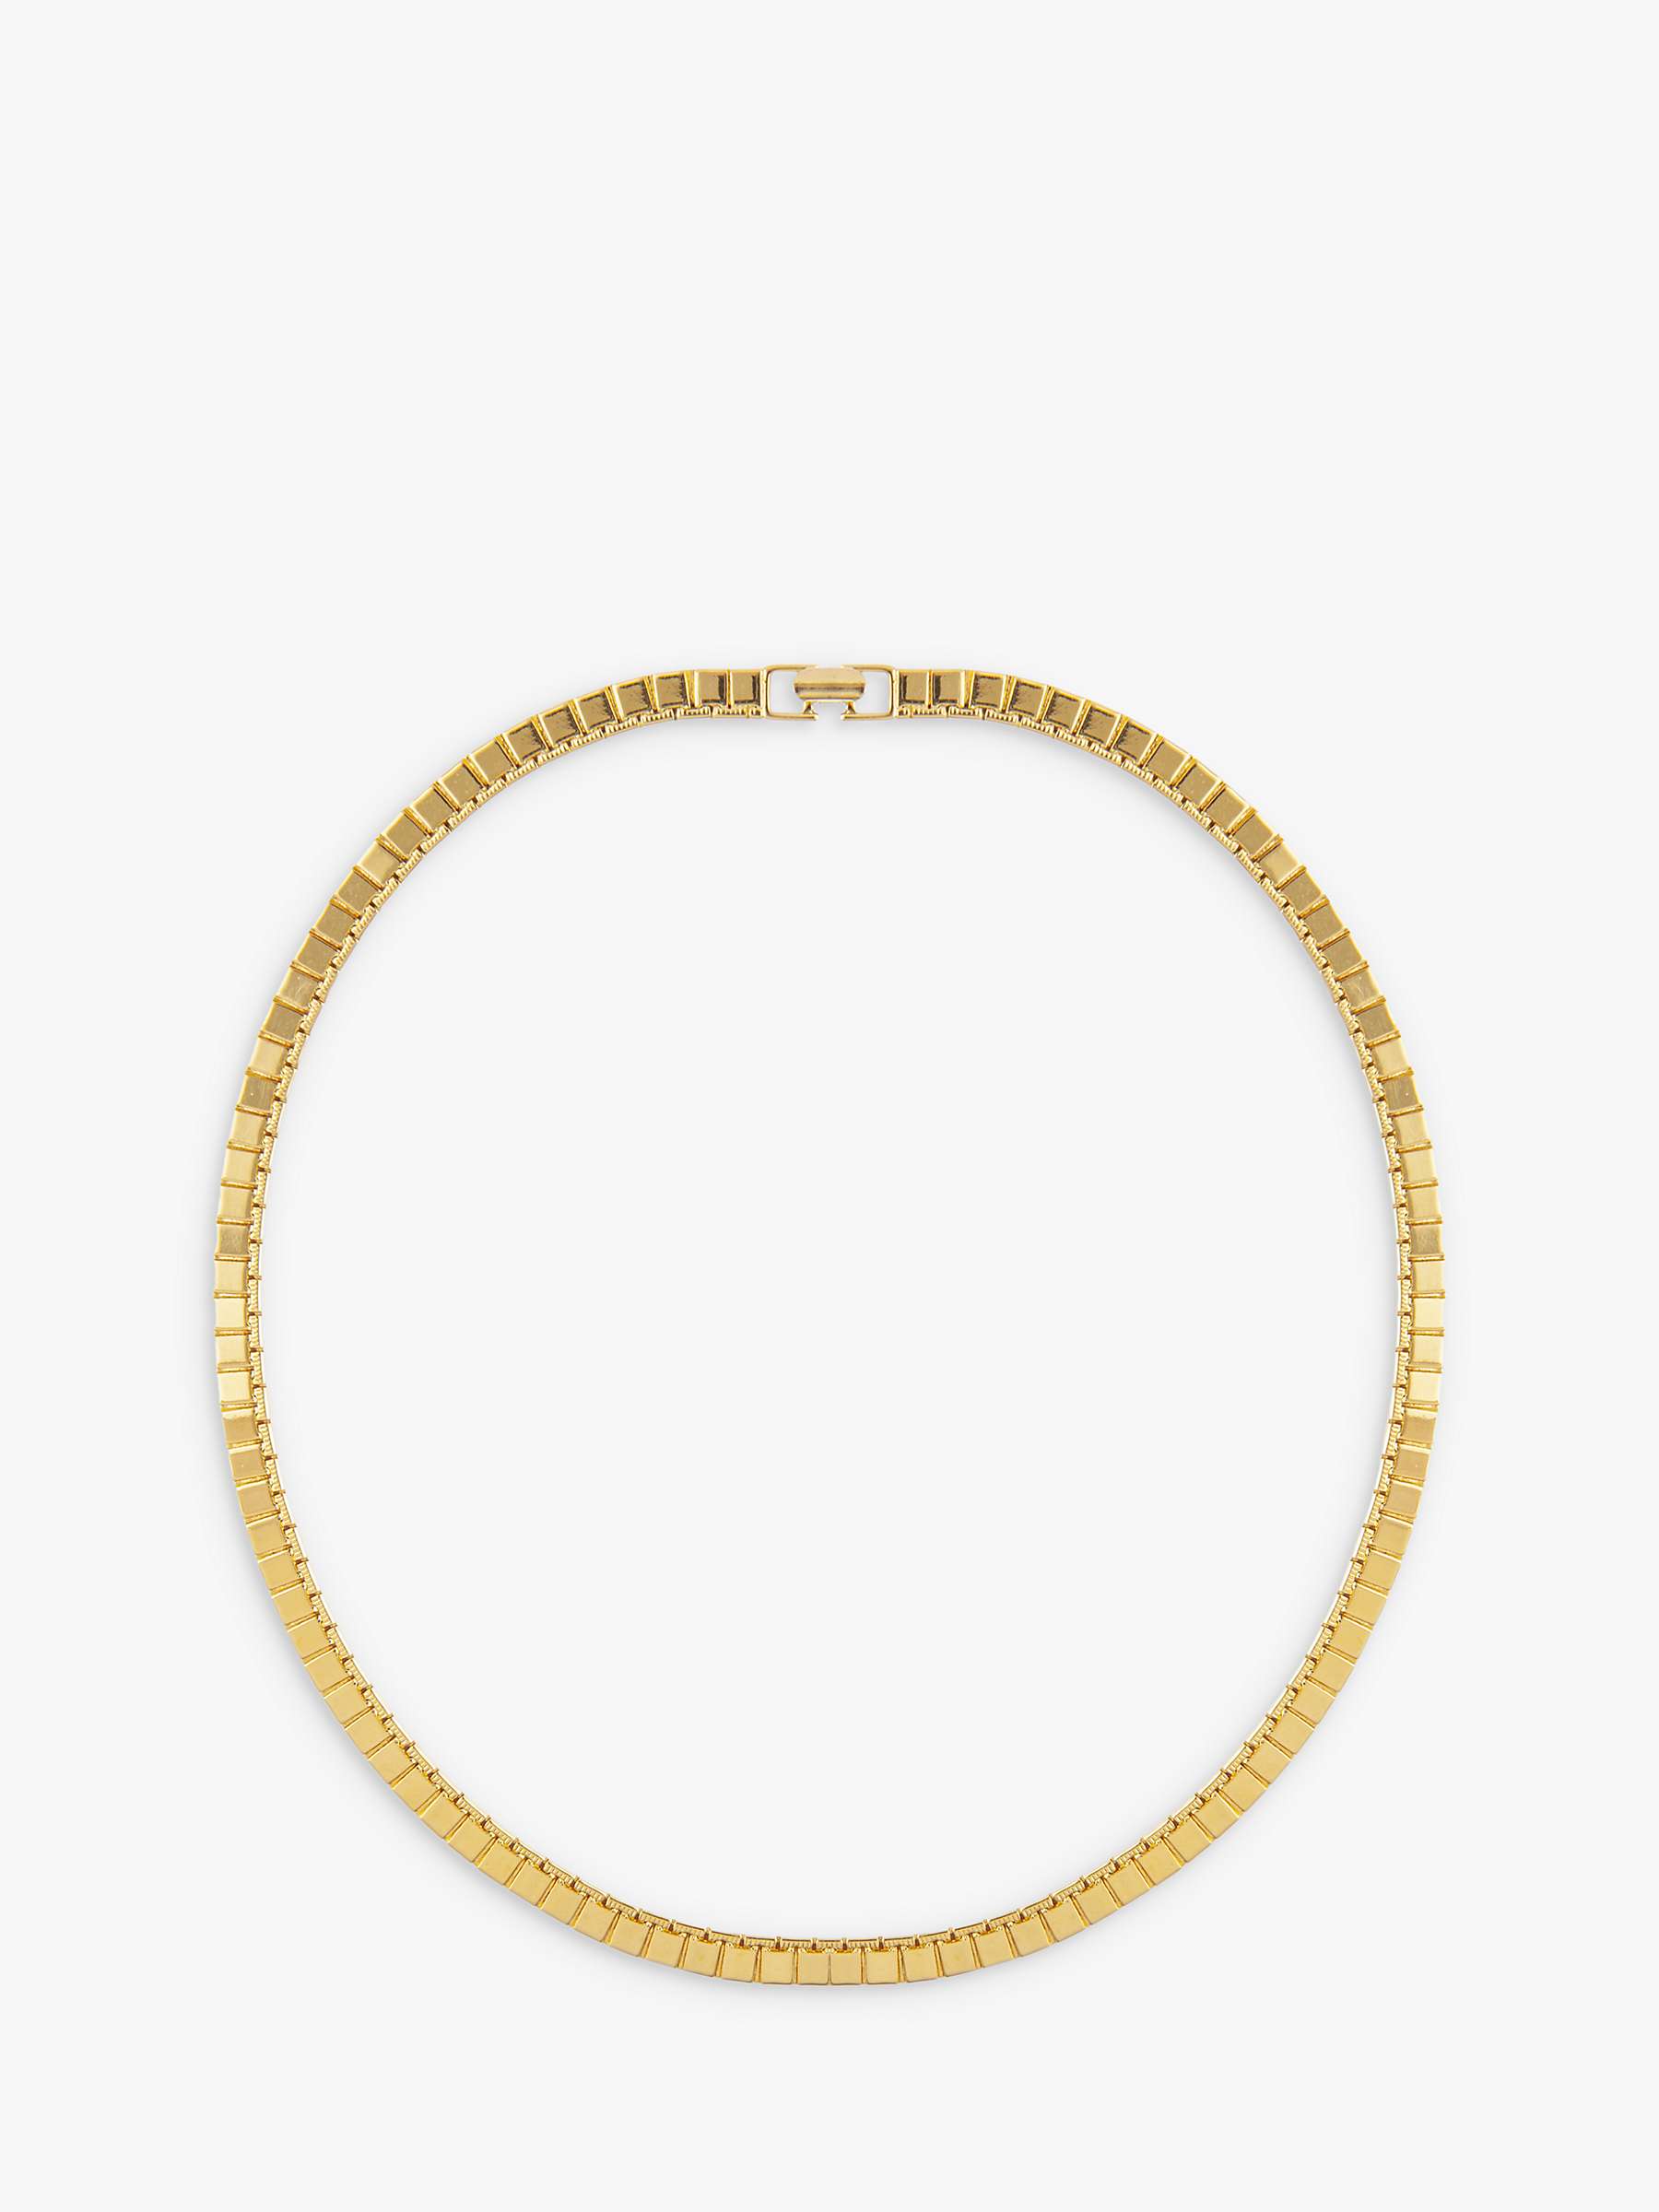 Buy Eclectica Vintage Monet 22ct Gold Plated Collar Necklace, Dated Circa 1980s Online at johnlewis.com